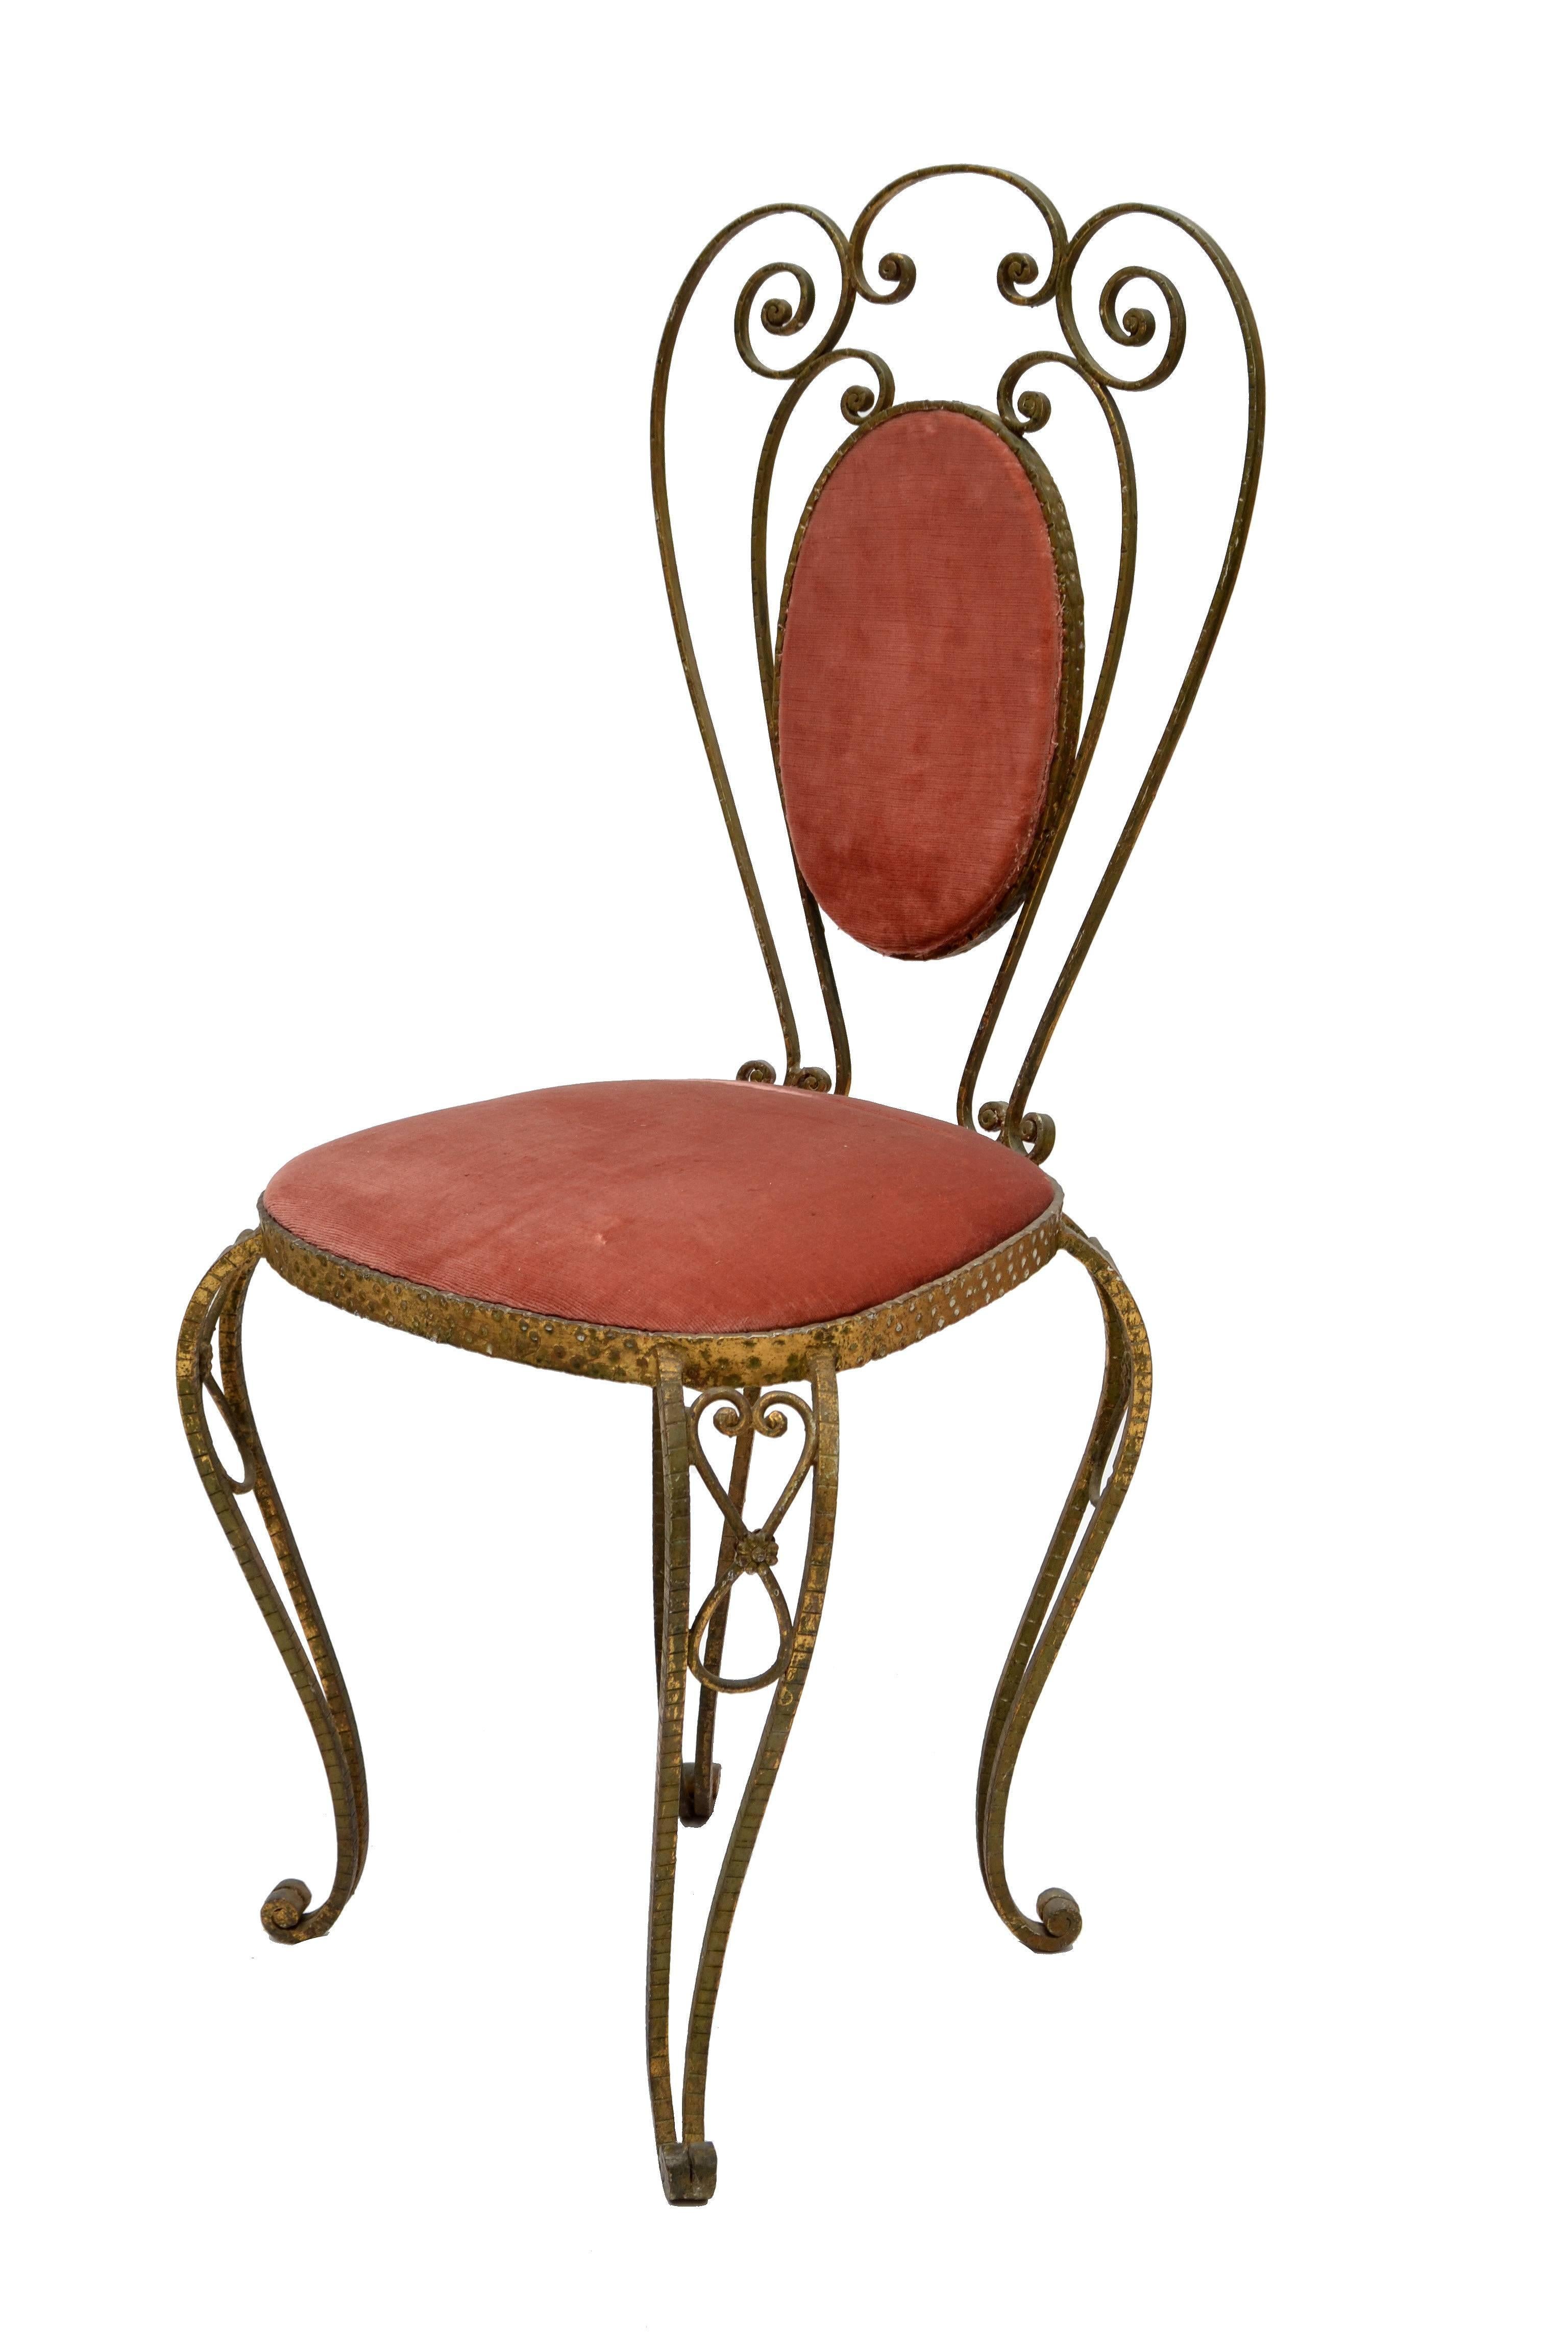 Whimsical Art Deco Style Italian gold leaf hand hammered wrought iron vanity chair in golden finish with pink velvet upholstery by Pier Luigi Colli.
We have also available in our other listings mirror, umbrella stand, stool & consoles.
 